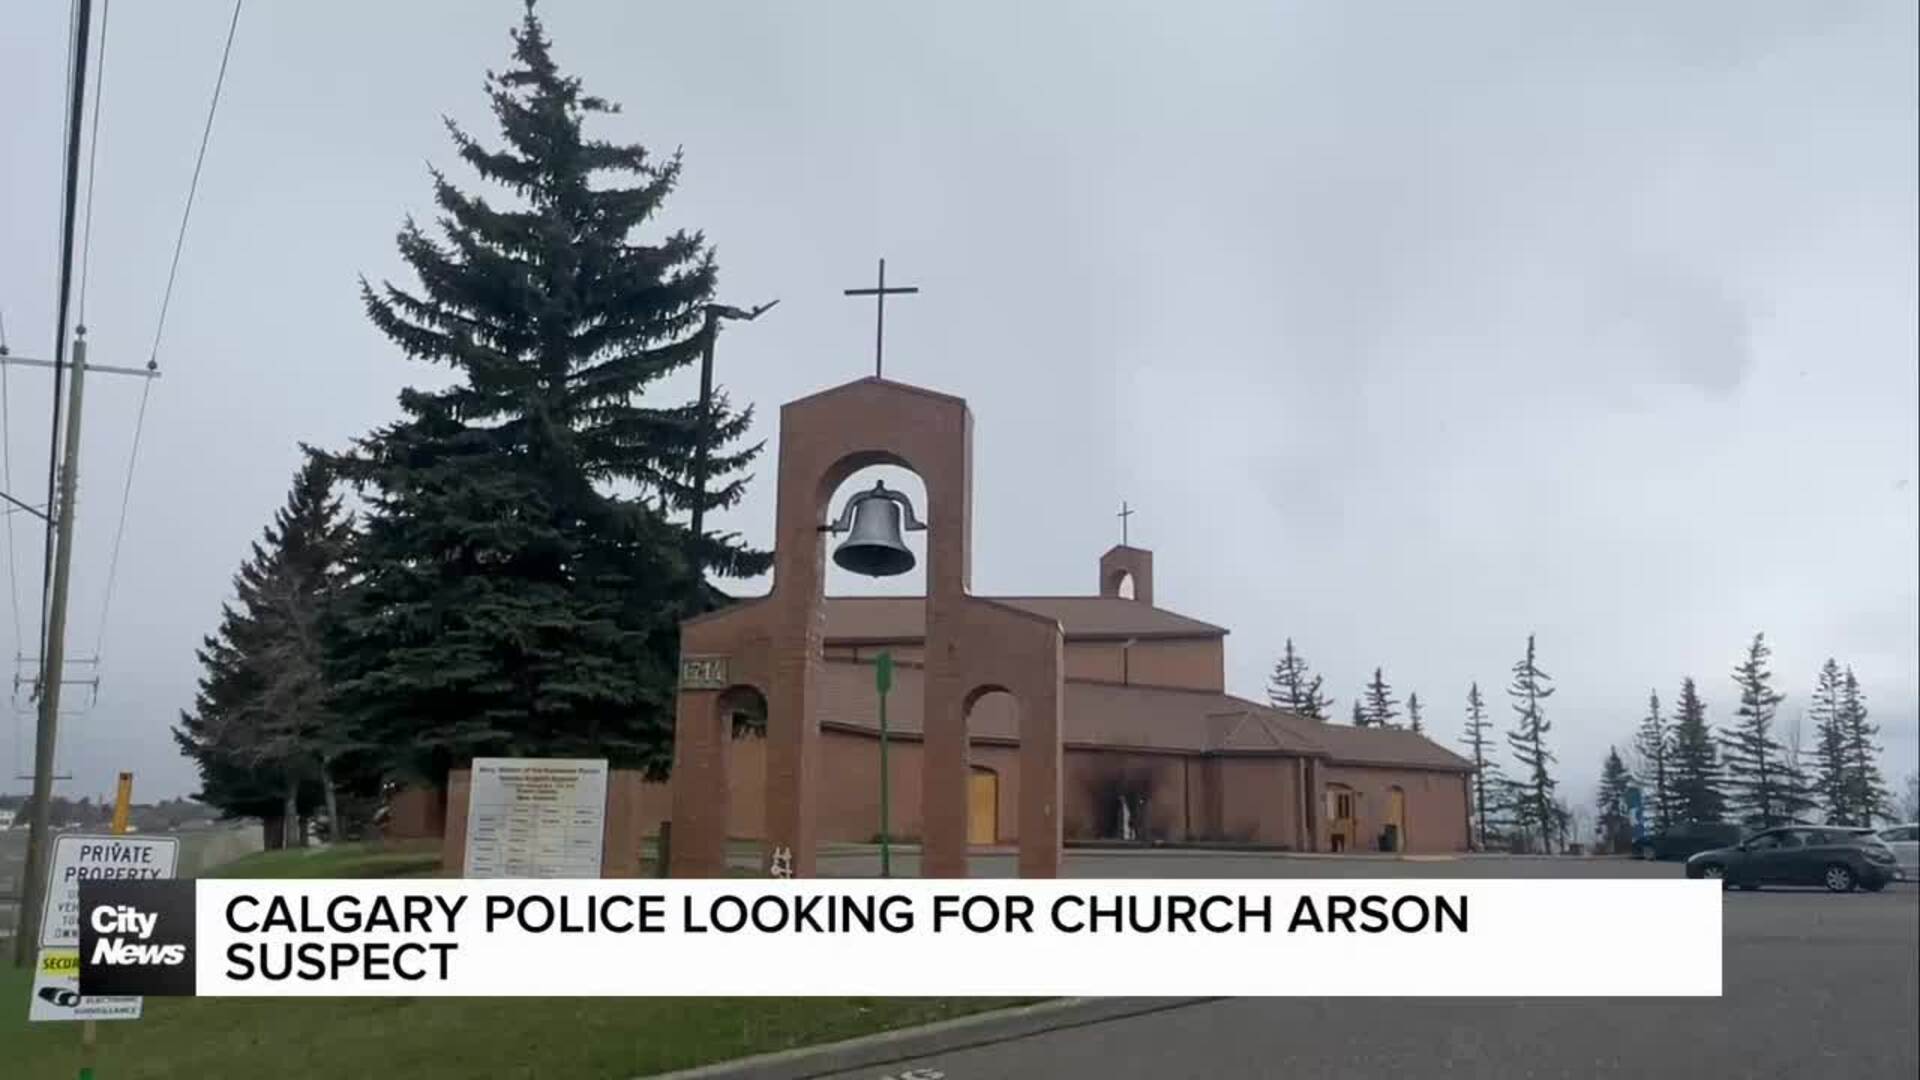 Calgary police looking for church arson suspect